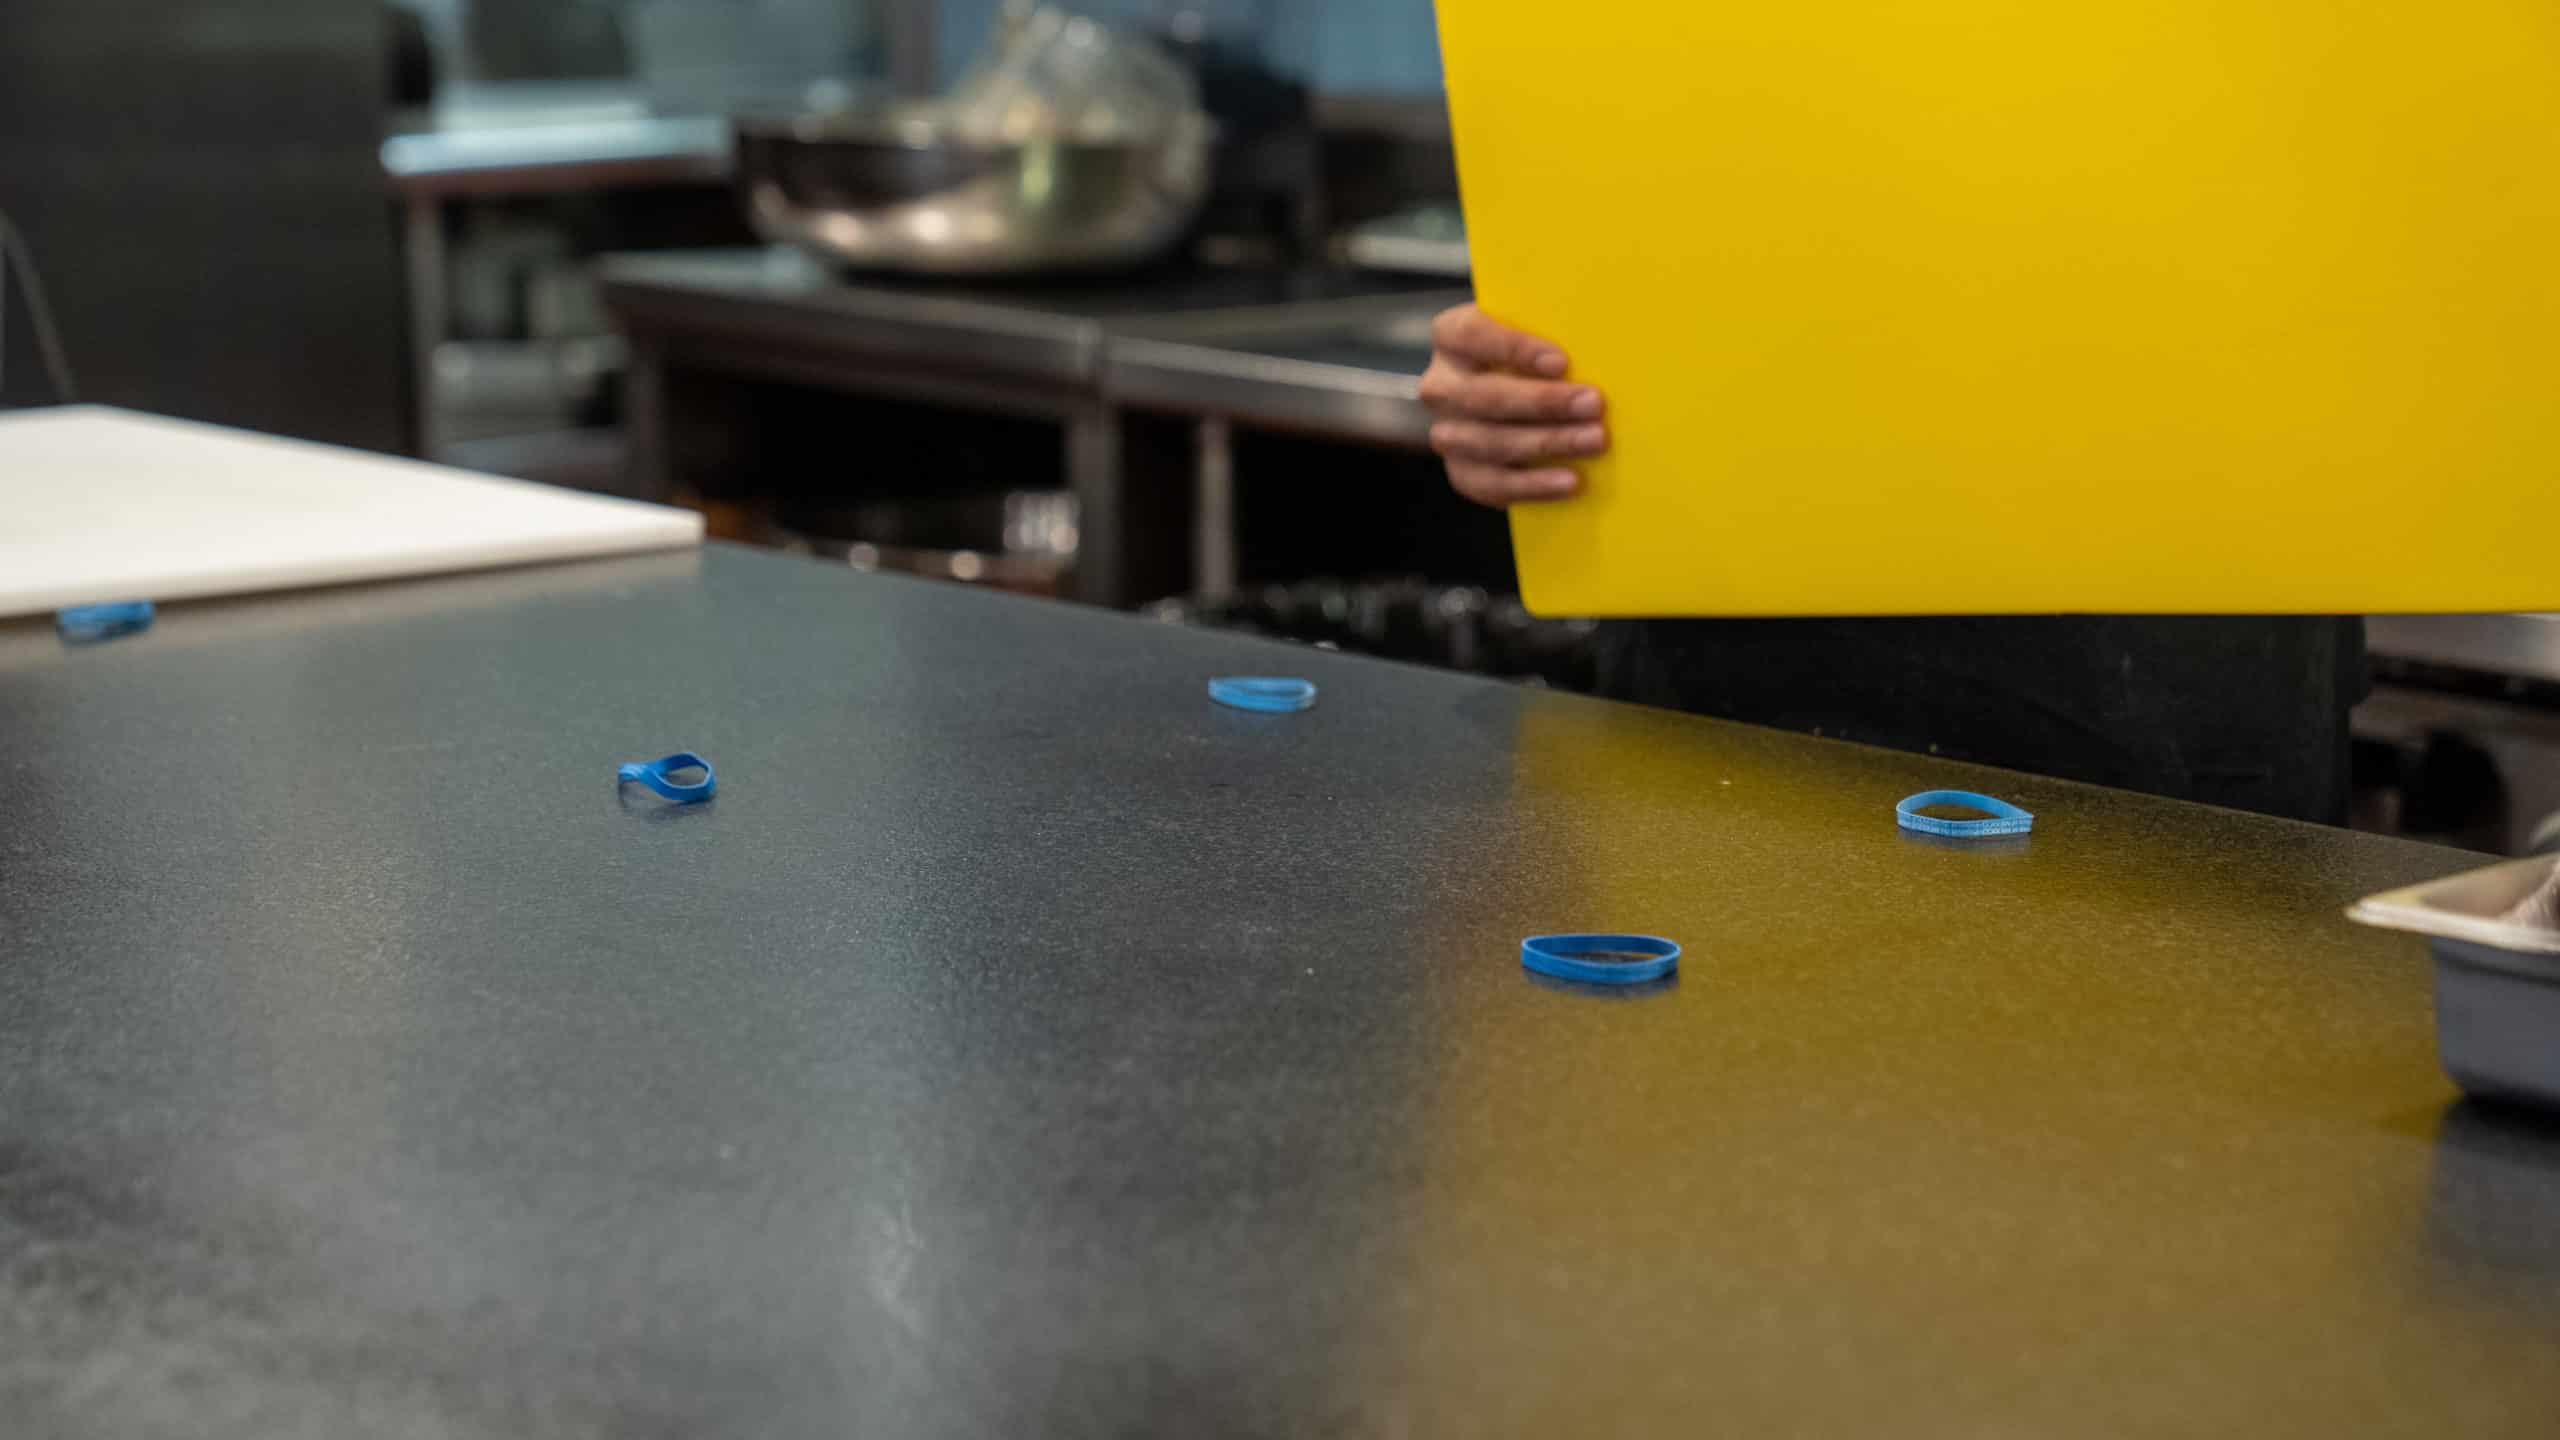 person holds yellow cutting board above four blue rubber bands sitting on gray kitchen counter